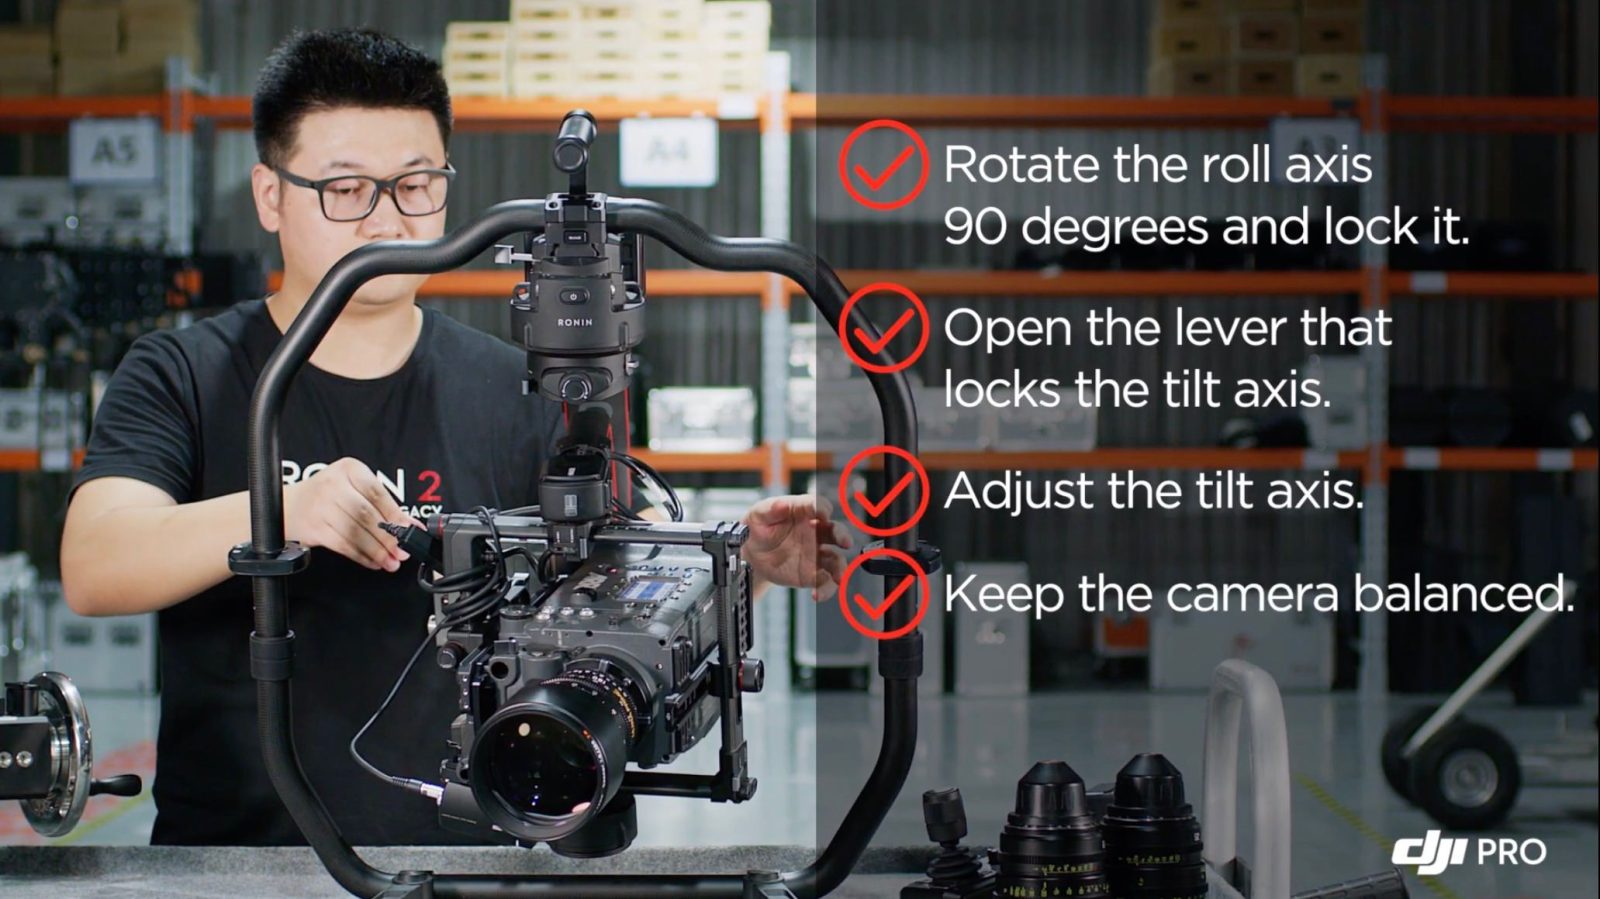 DJI Pro launches dedicated YouTube channel